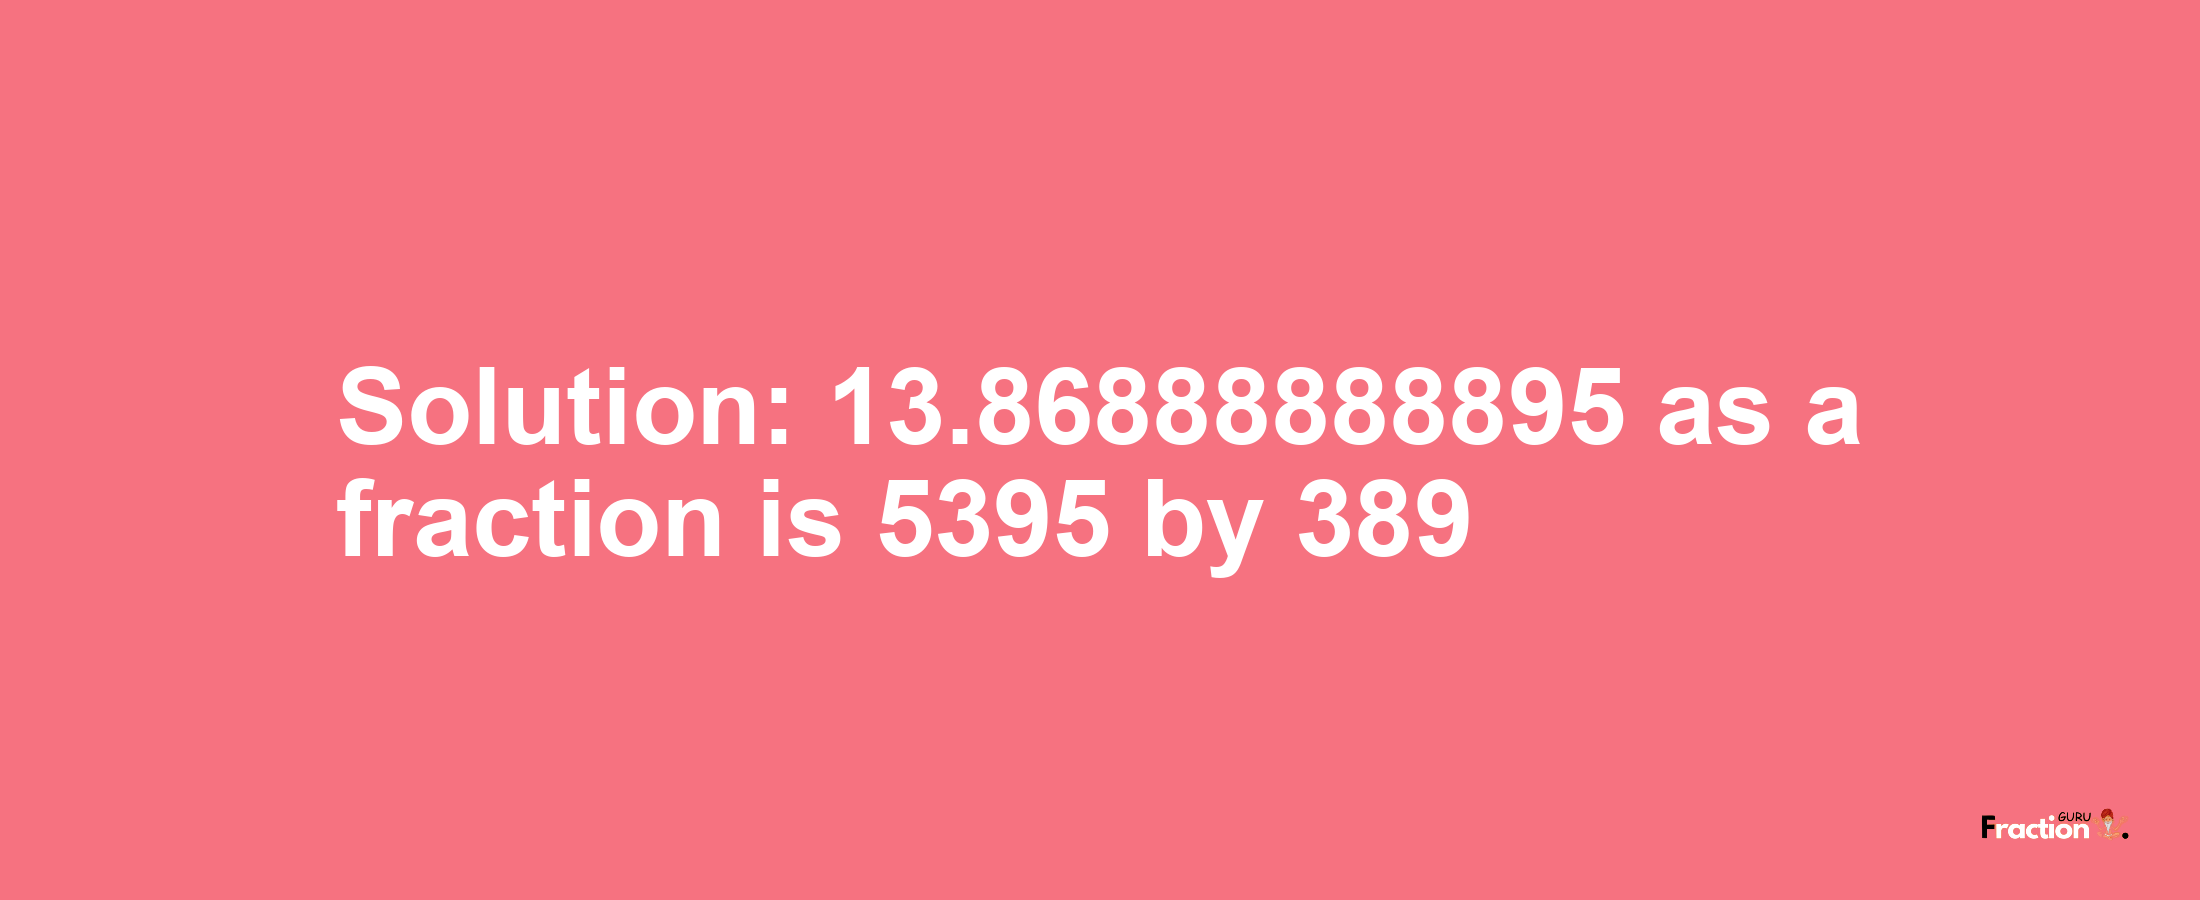 Solution:13.86888888895 as a fraction is 5395/389